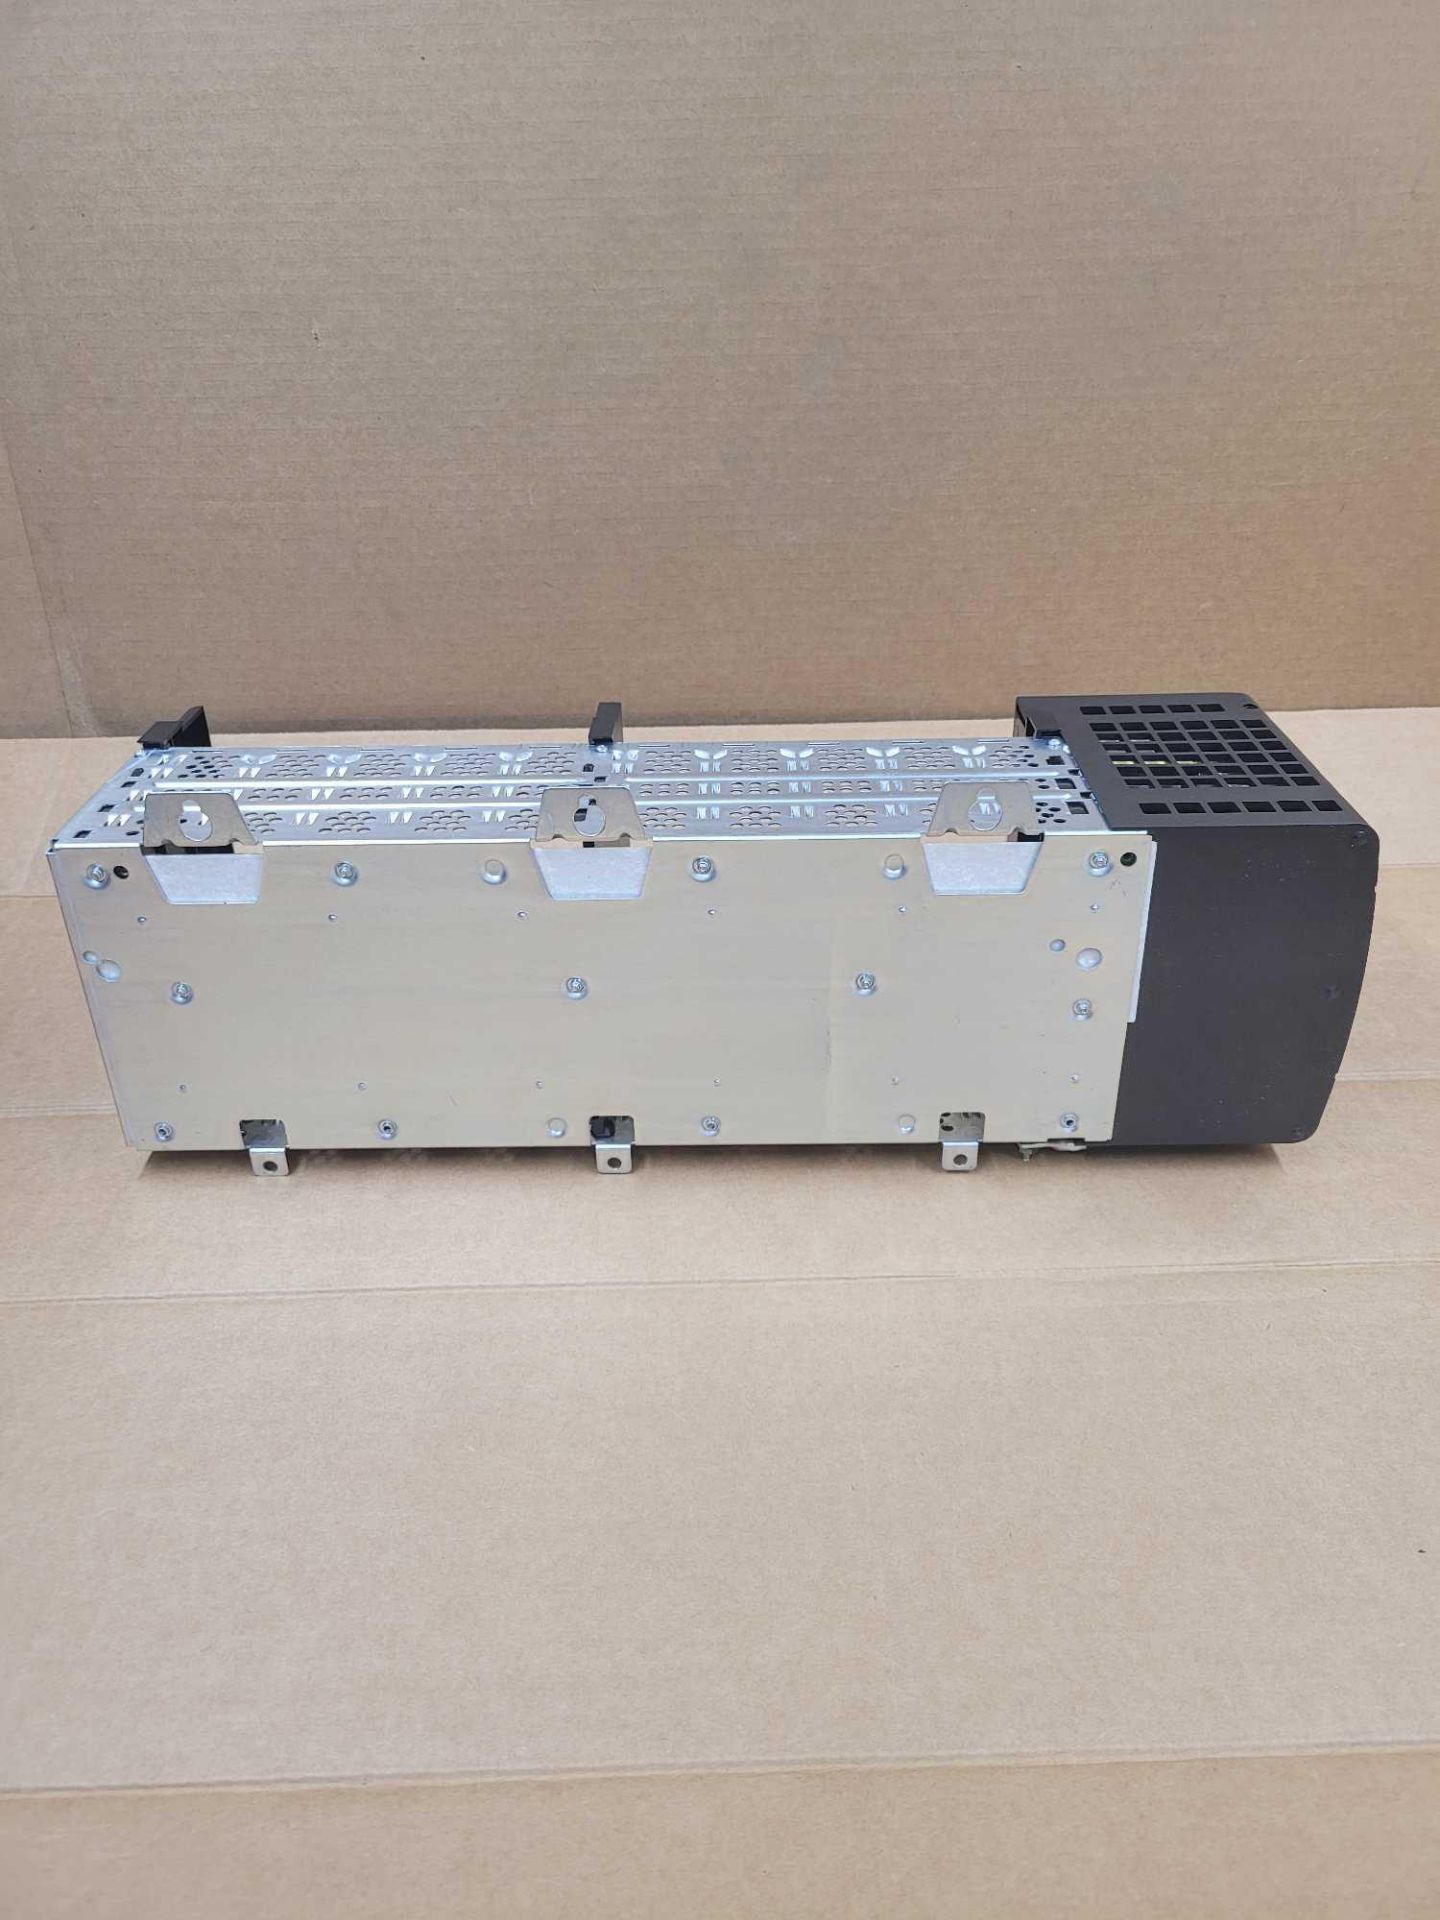 ALLEN BRADLEY 1756-PA75 with 1756-A10 / Series B Power Supply with Series B 10 Slot Chassis  /  Lot - Image 8 of 11